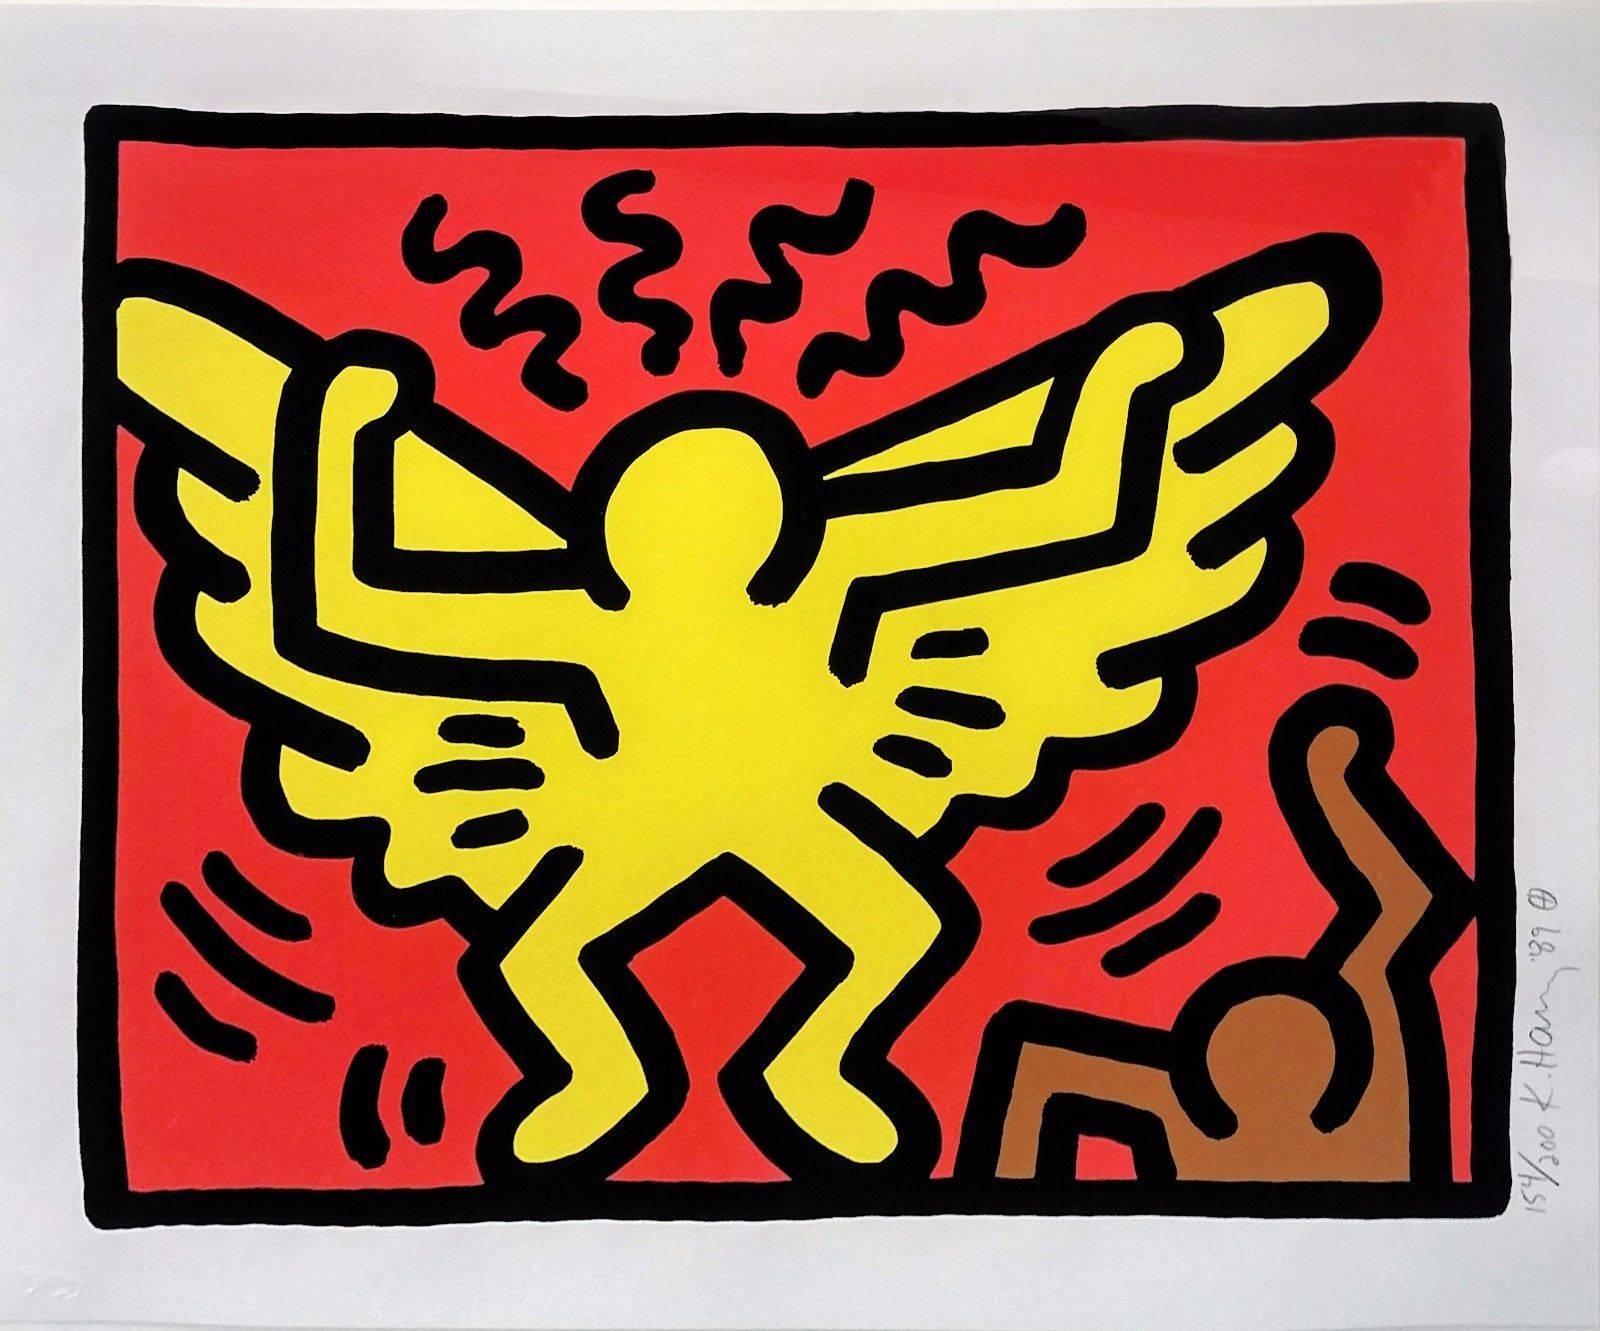 POP SHOP IV(1) - Print by Keith Haring